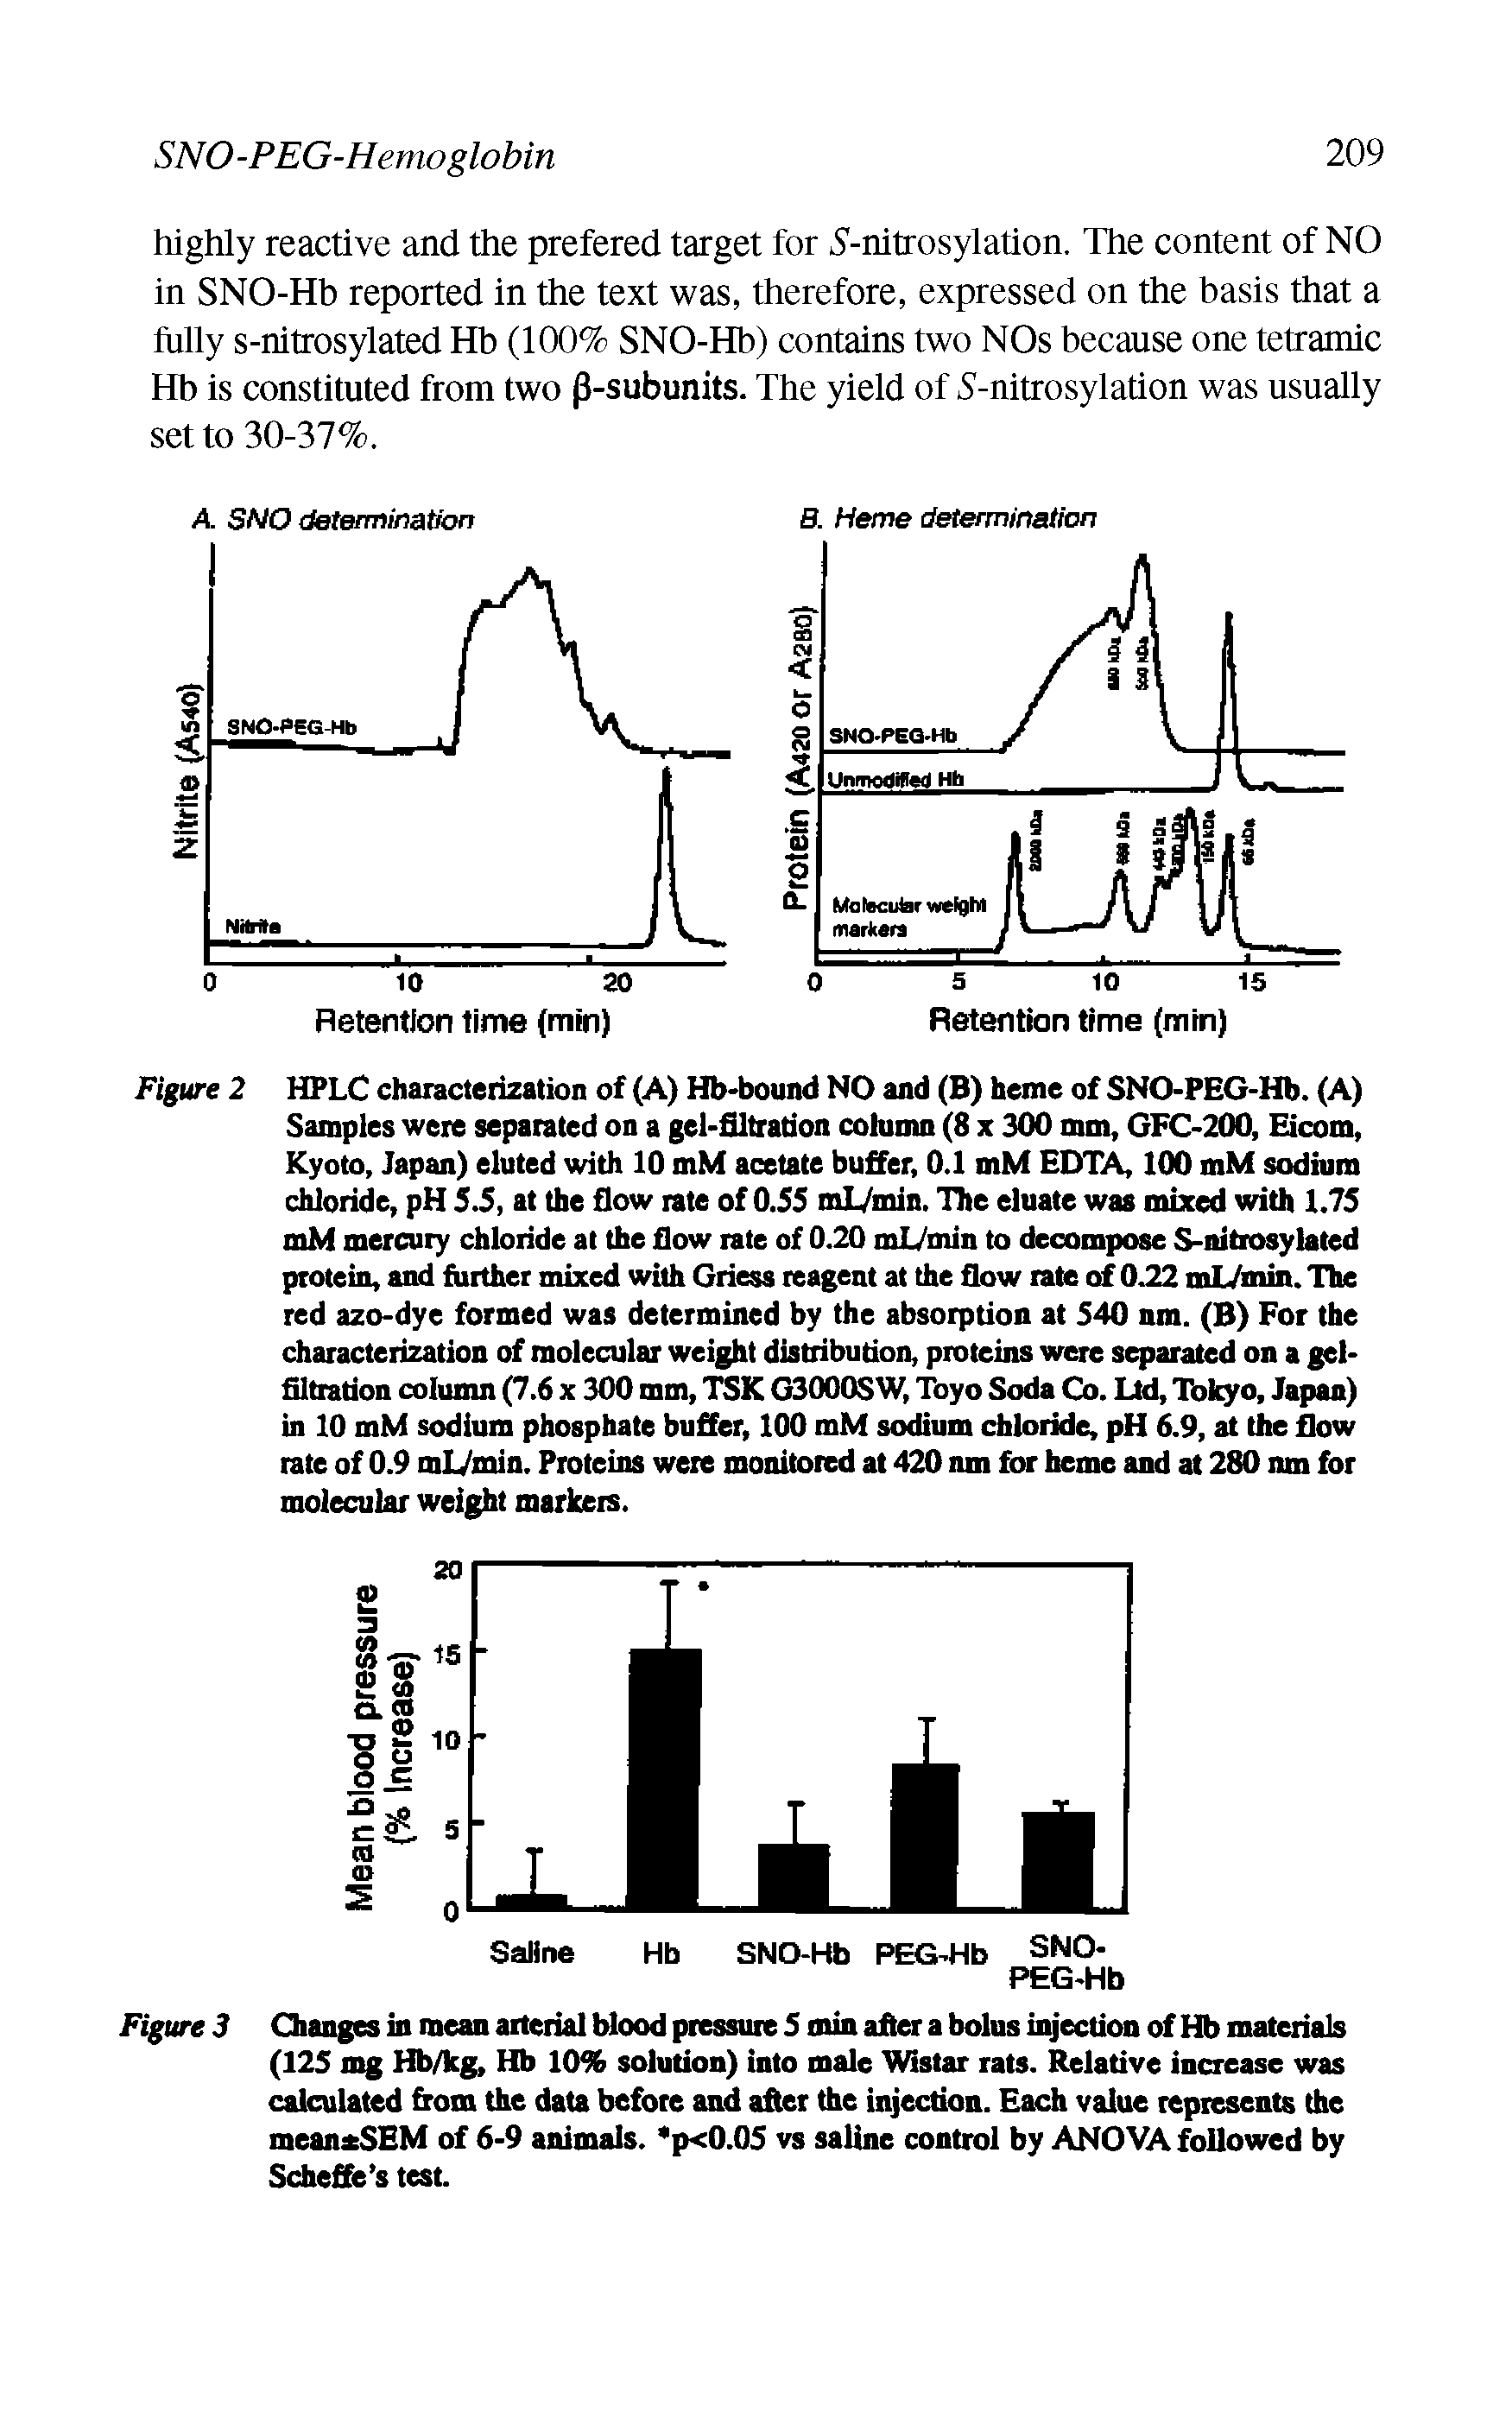 Figure 2 HPLC characterization of (A) Hb-bound NO and (B) heme of SNO-PEG-Hb. (A) Samples were separated on a gel-filtration cohimn (8 x 300 mm, GFC-200, Eicom, Kyoto, Japan) eluted with 10 mM acetate buffer, 0.1 mM EDTA, 100 mM sod him chloride, pH 5.5, at the flow rate of 0,55 mlAnin. The eluate was mixed with 1.75 mM mercury chloride at the flow rate of 0.20 mlVmin to decompose S-nitiosylated protein, and further mixed with Griess reagent at the flow rale of 0.22 mlAnin. The red azo-dye formed was determined by the absorption at 540 nm. (B) For the characterization of molecular weight distribution, proteins were sqiarated on a gel-filtration column (7.6 x 300 mm, TSK G3000SW, Toyo Soda Co. IM Tokyo, Japan) in 10 mM sodium phosphate buffer, 100 mM sodium chloride, pH 6.9, at the flow rate of 0.9 mL/min. Proteins were monitored at 420 nm for heme and at 280 nm for molecular weight markers.